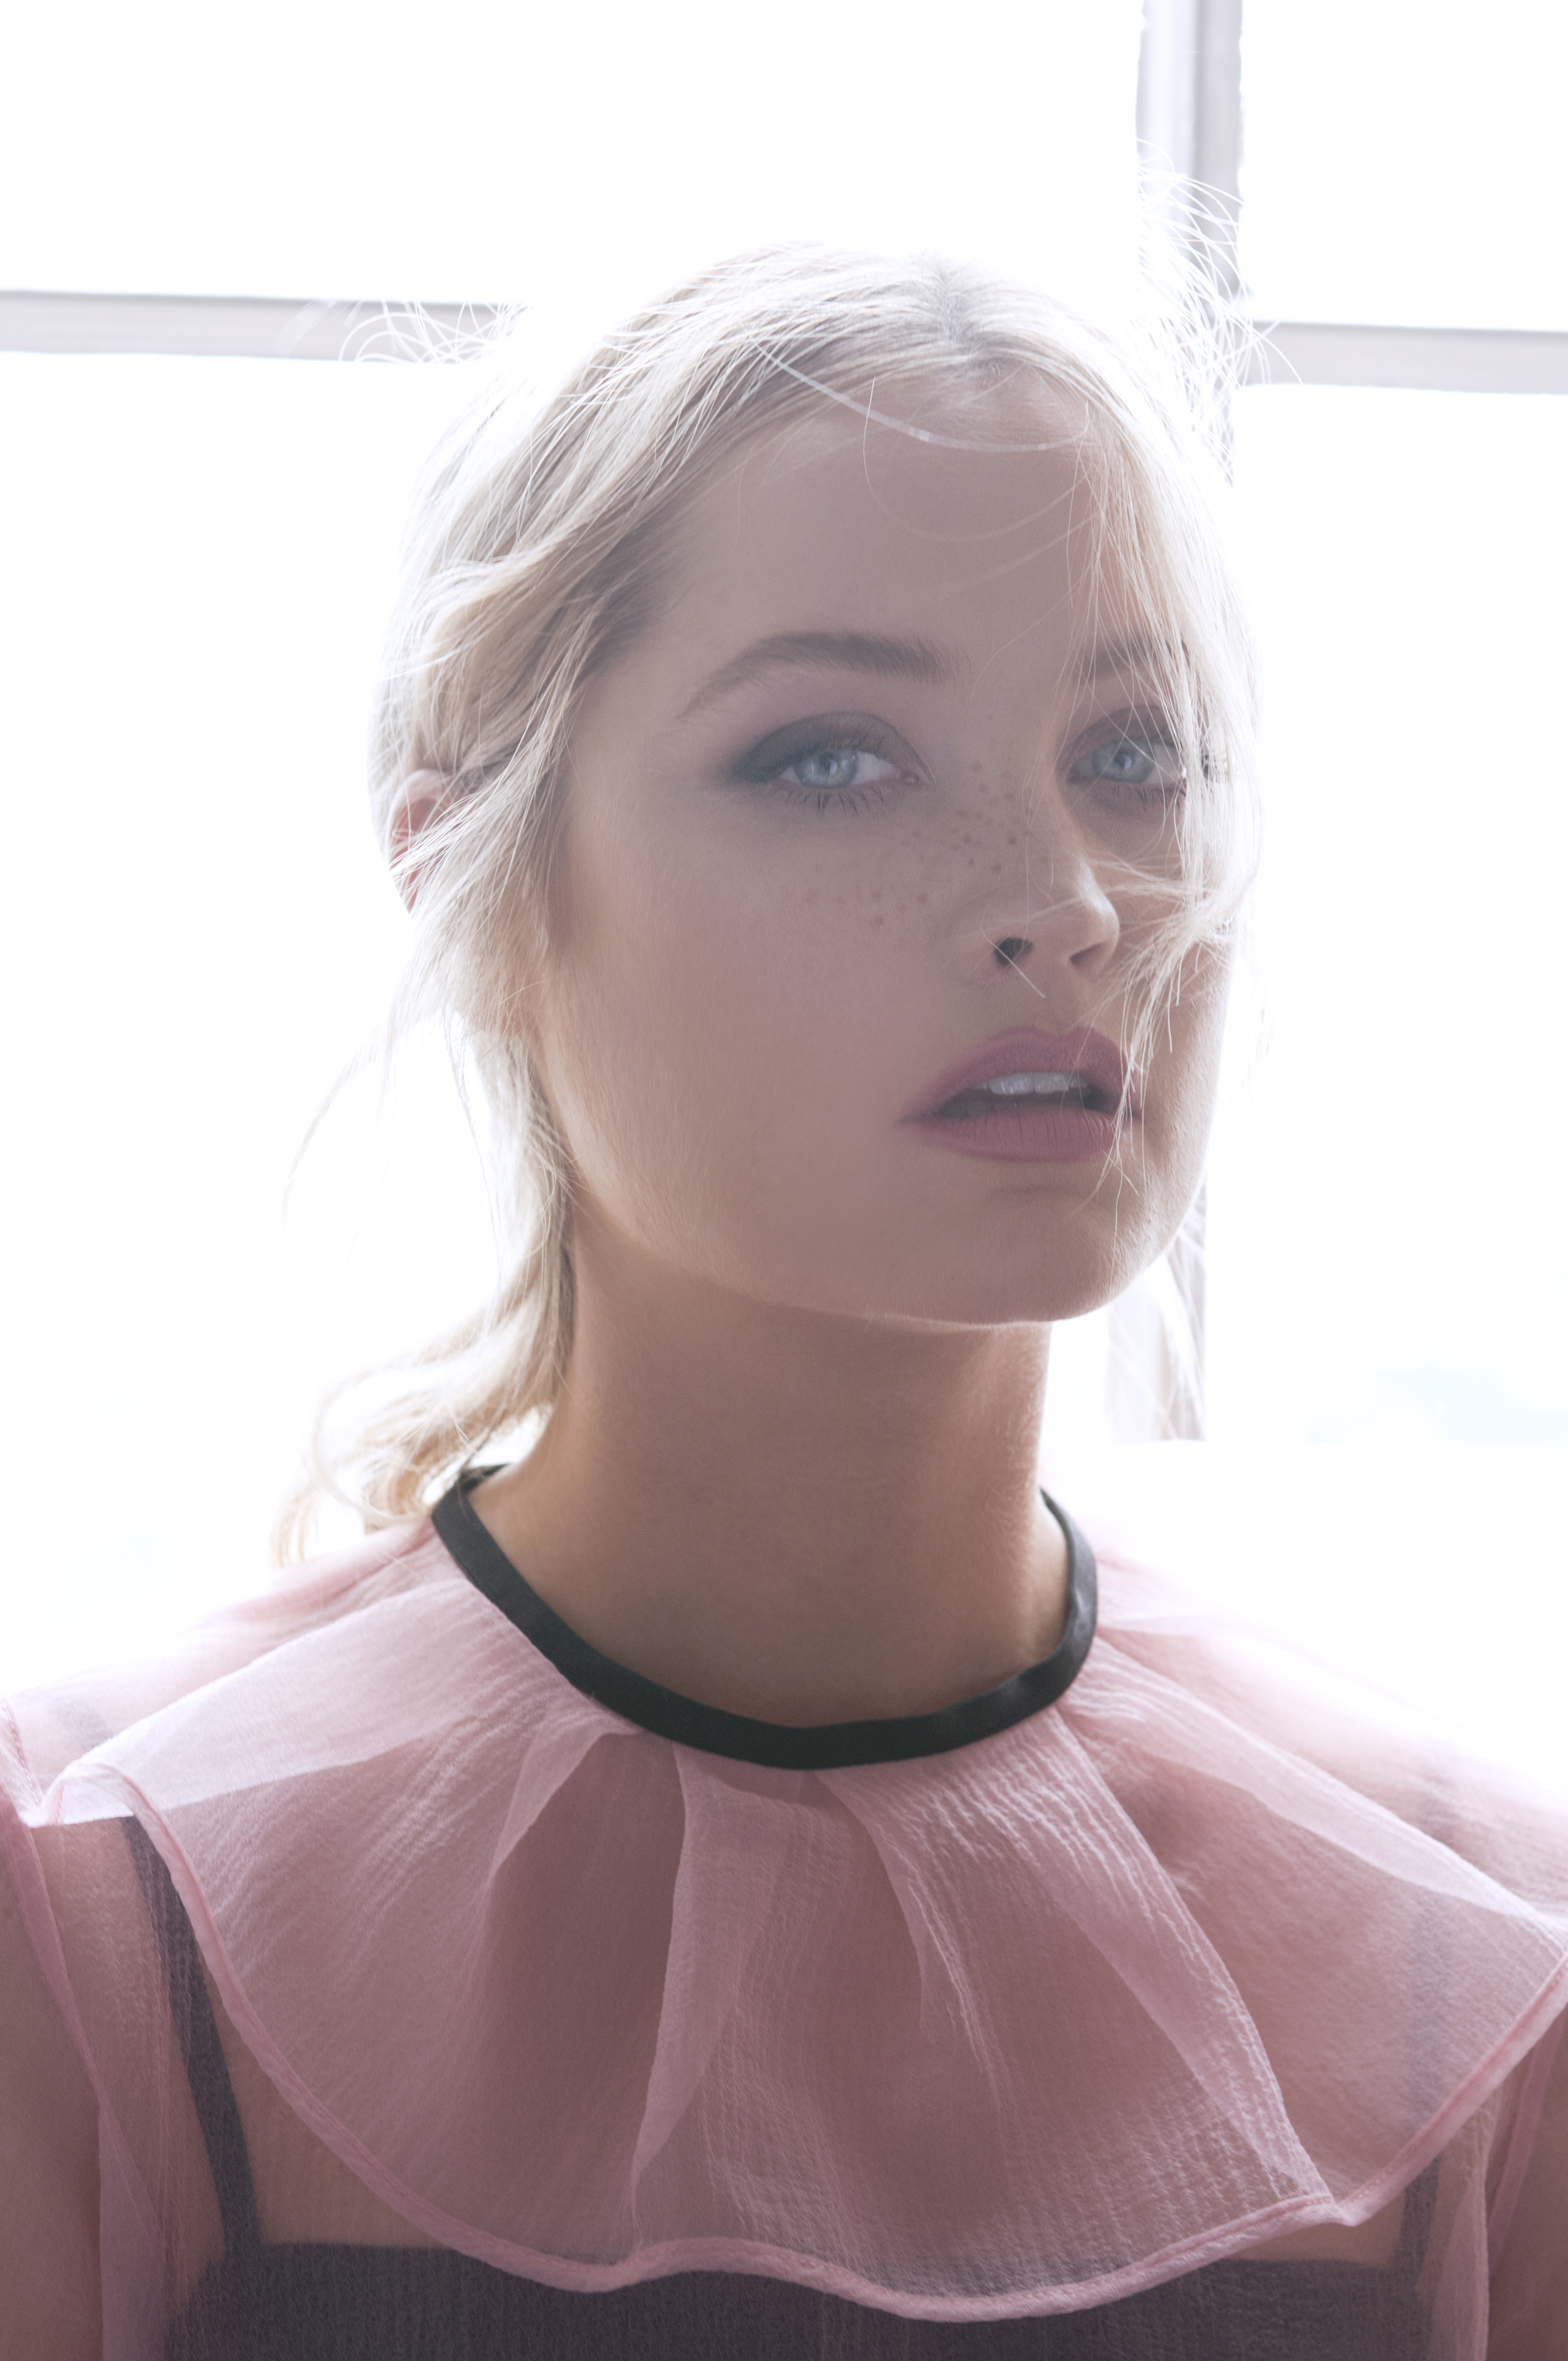 Laura Whitmore: The Truth Behind Social Media